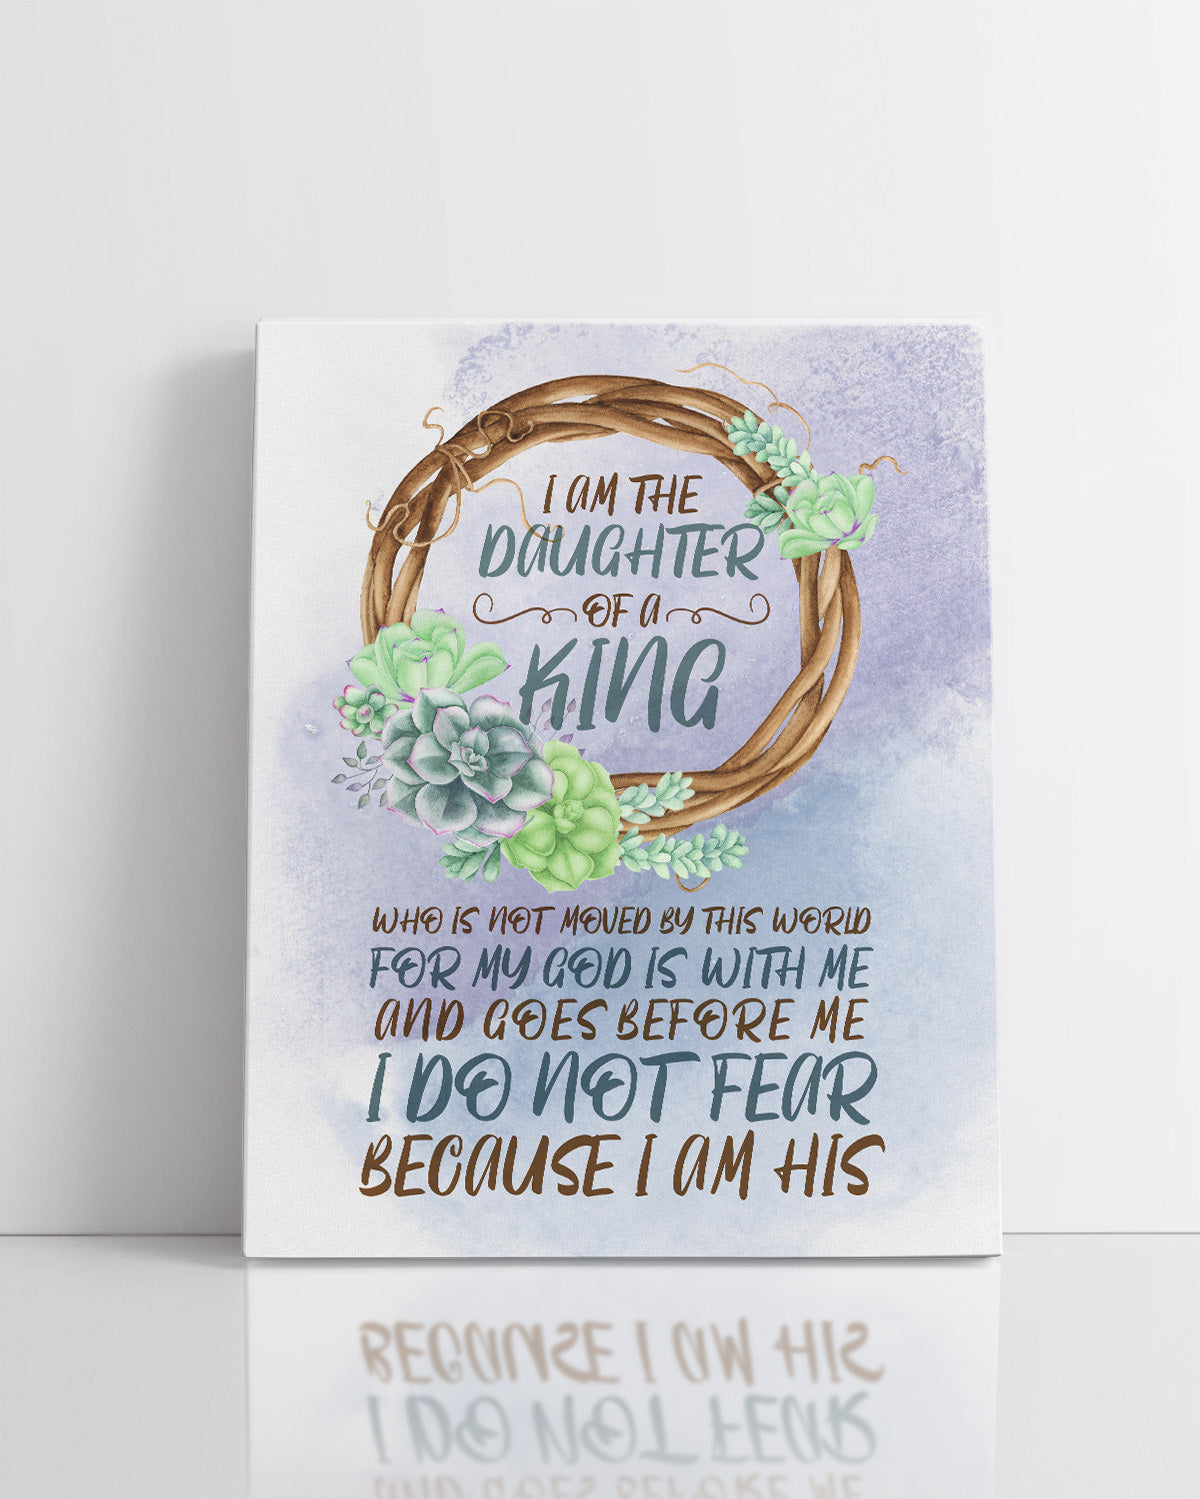 I Am The Daughter Of A King Religious Wall Decor - Christian Bible Verse Wall Art - Bedroom Aesthetic Home Decor - Gift for Women Girls Teen Tweens